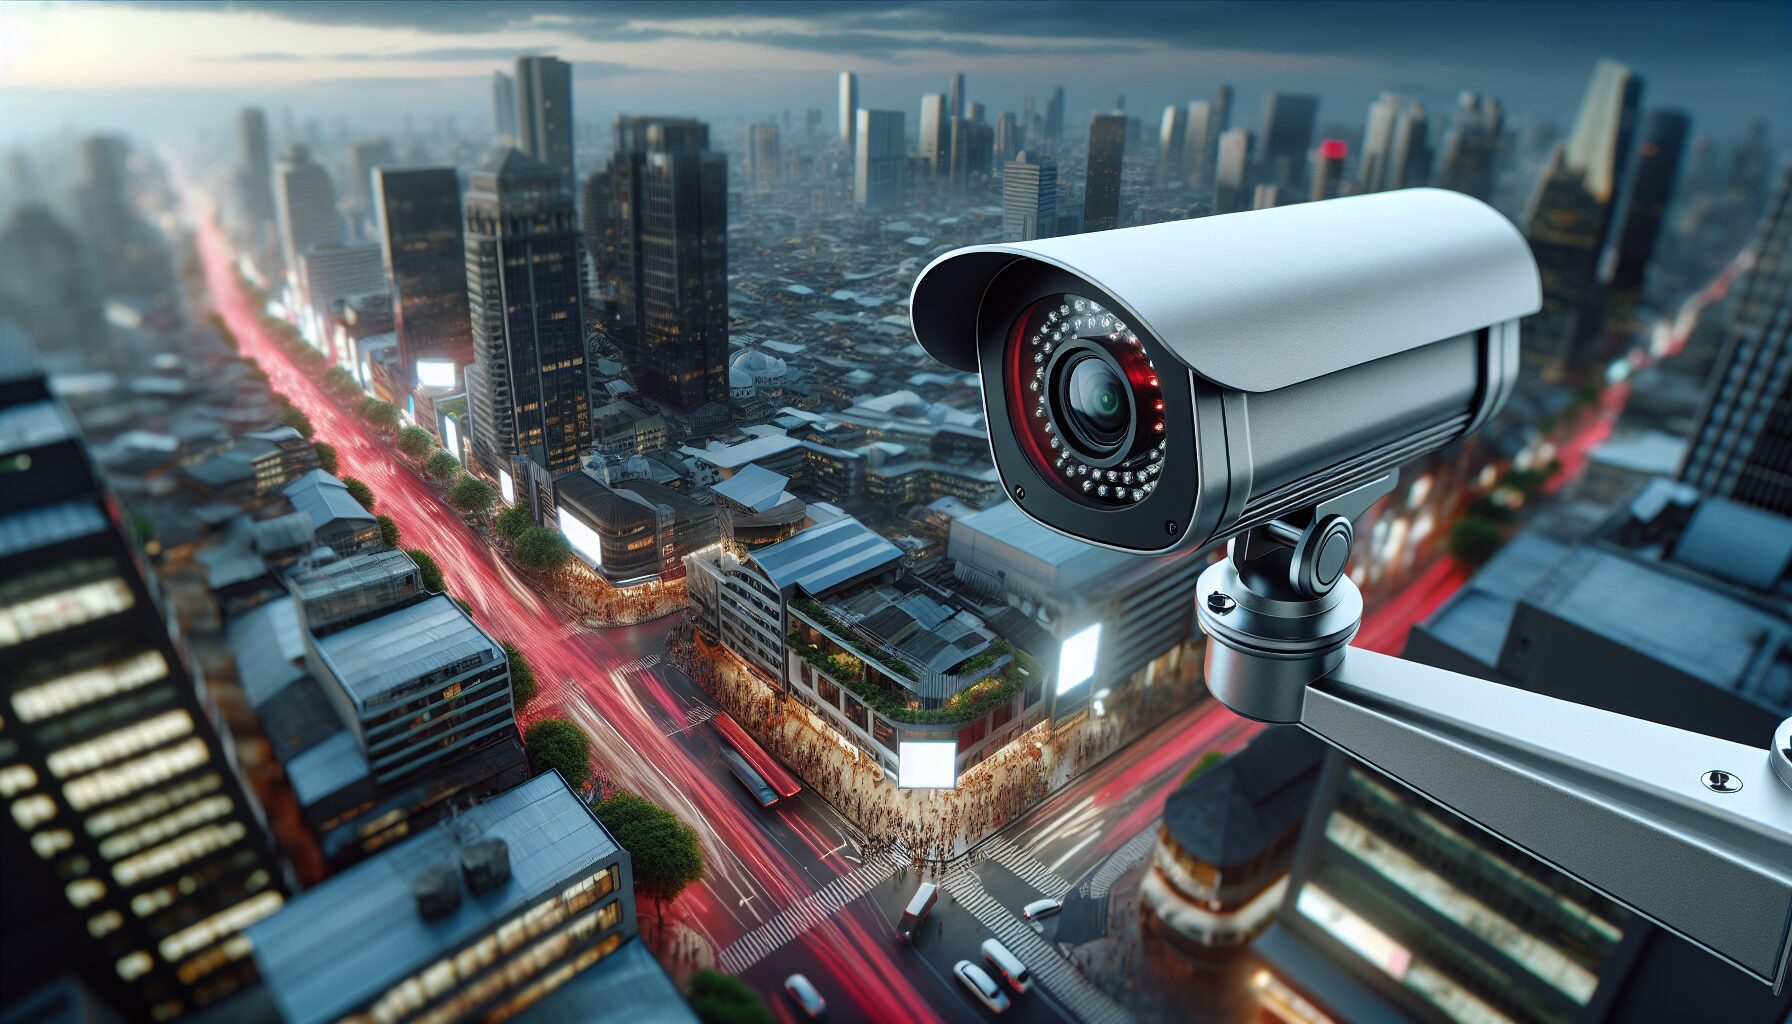 CCTV video surveillance as one of the Security Solutions in Tanzania